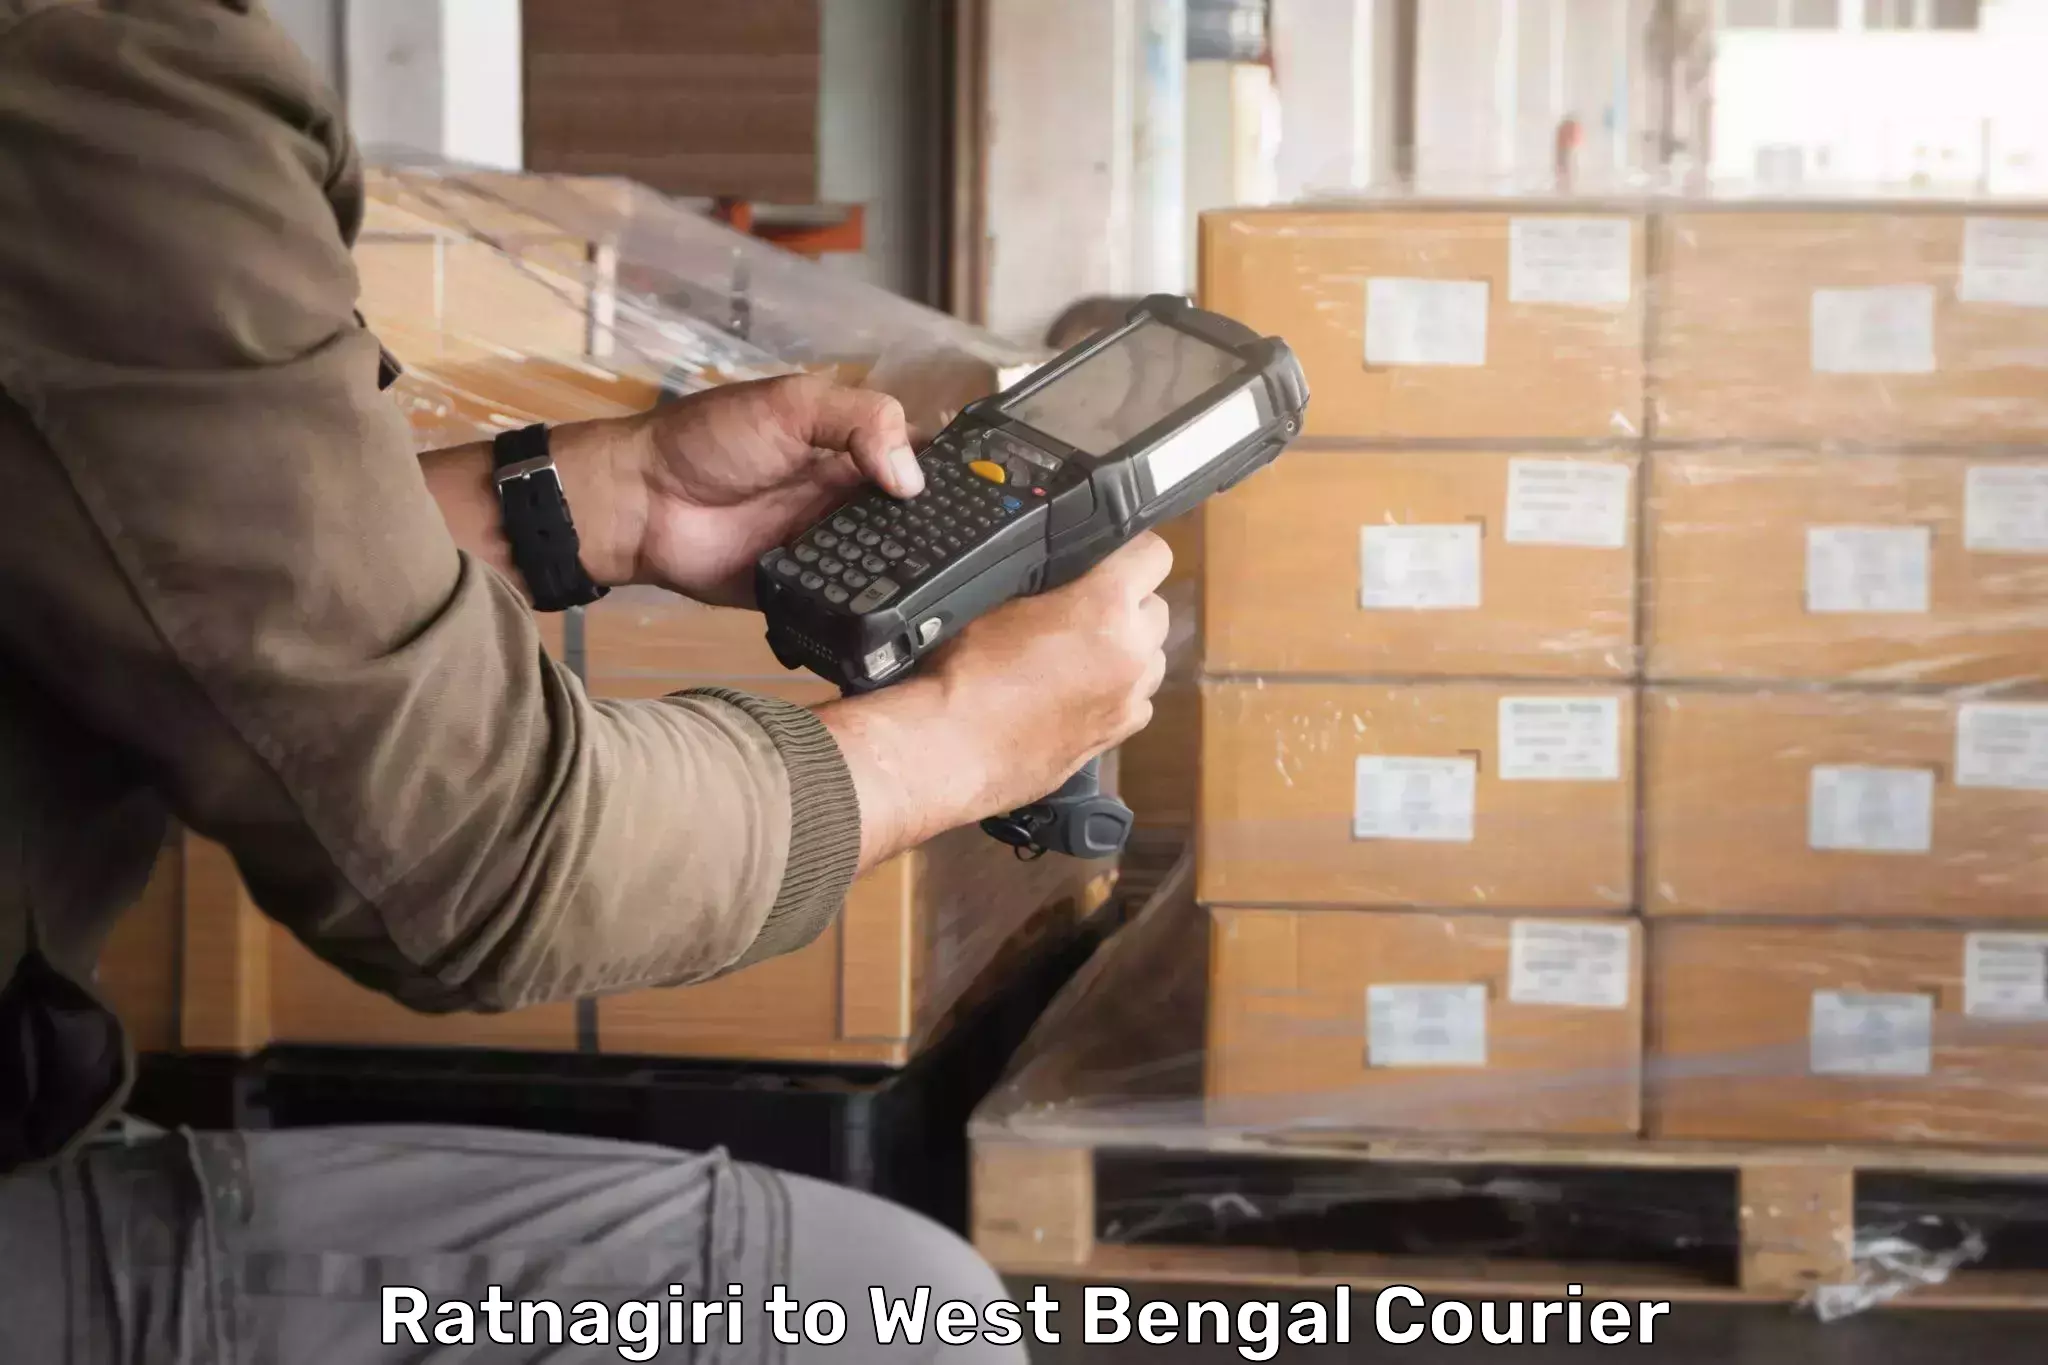 Sustainable shipping practices Ratnagiri to West Bengal